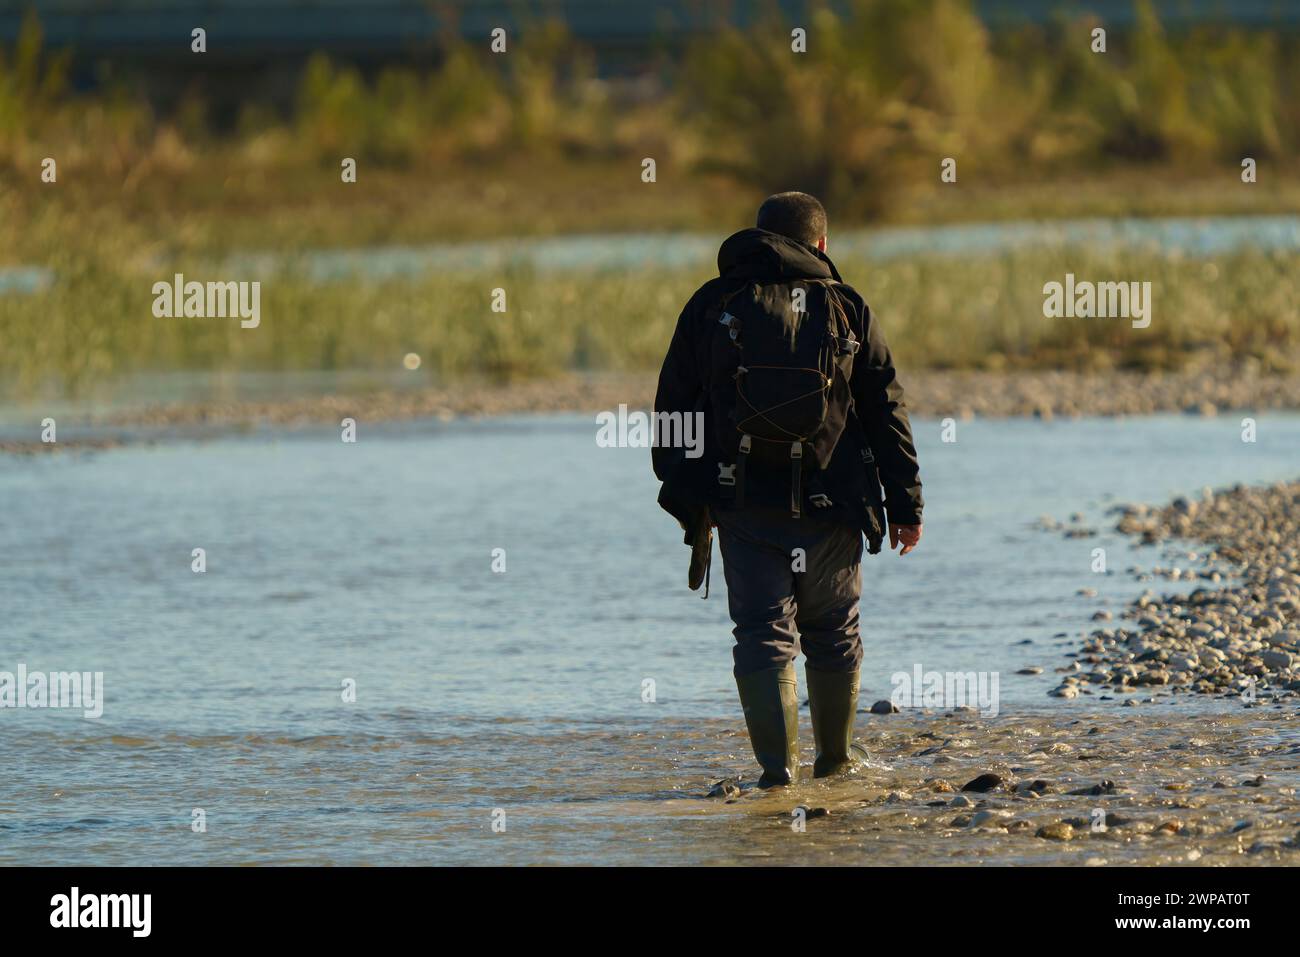 Man walking in a stream. looking for precious stones in water. Stock Photo